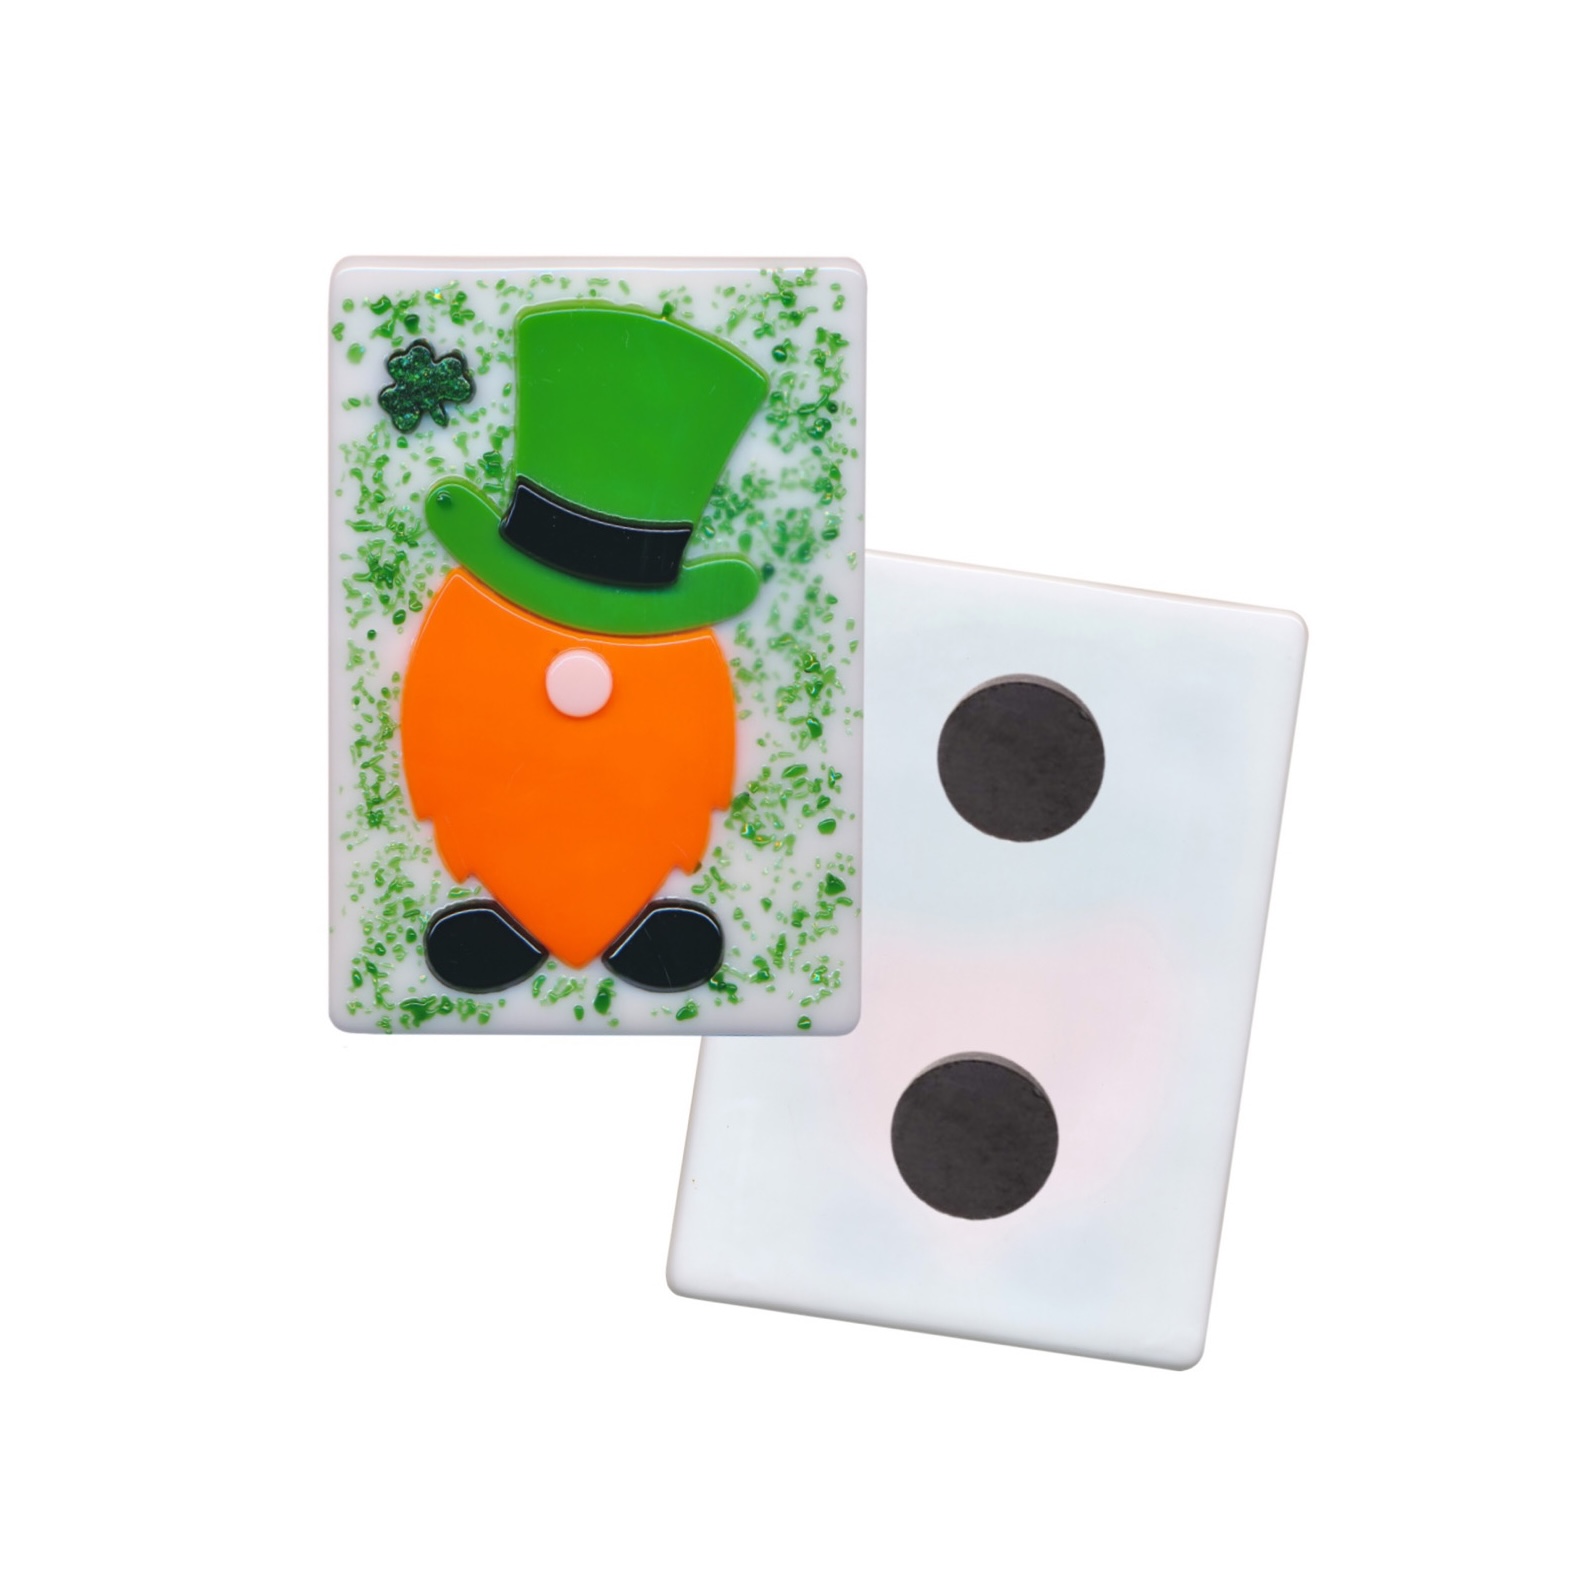 Fused glass leprechaun gnome with magnet